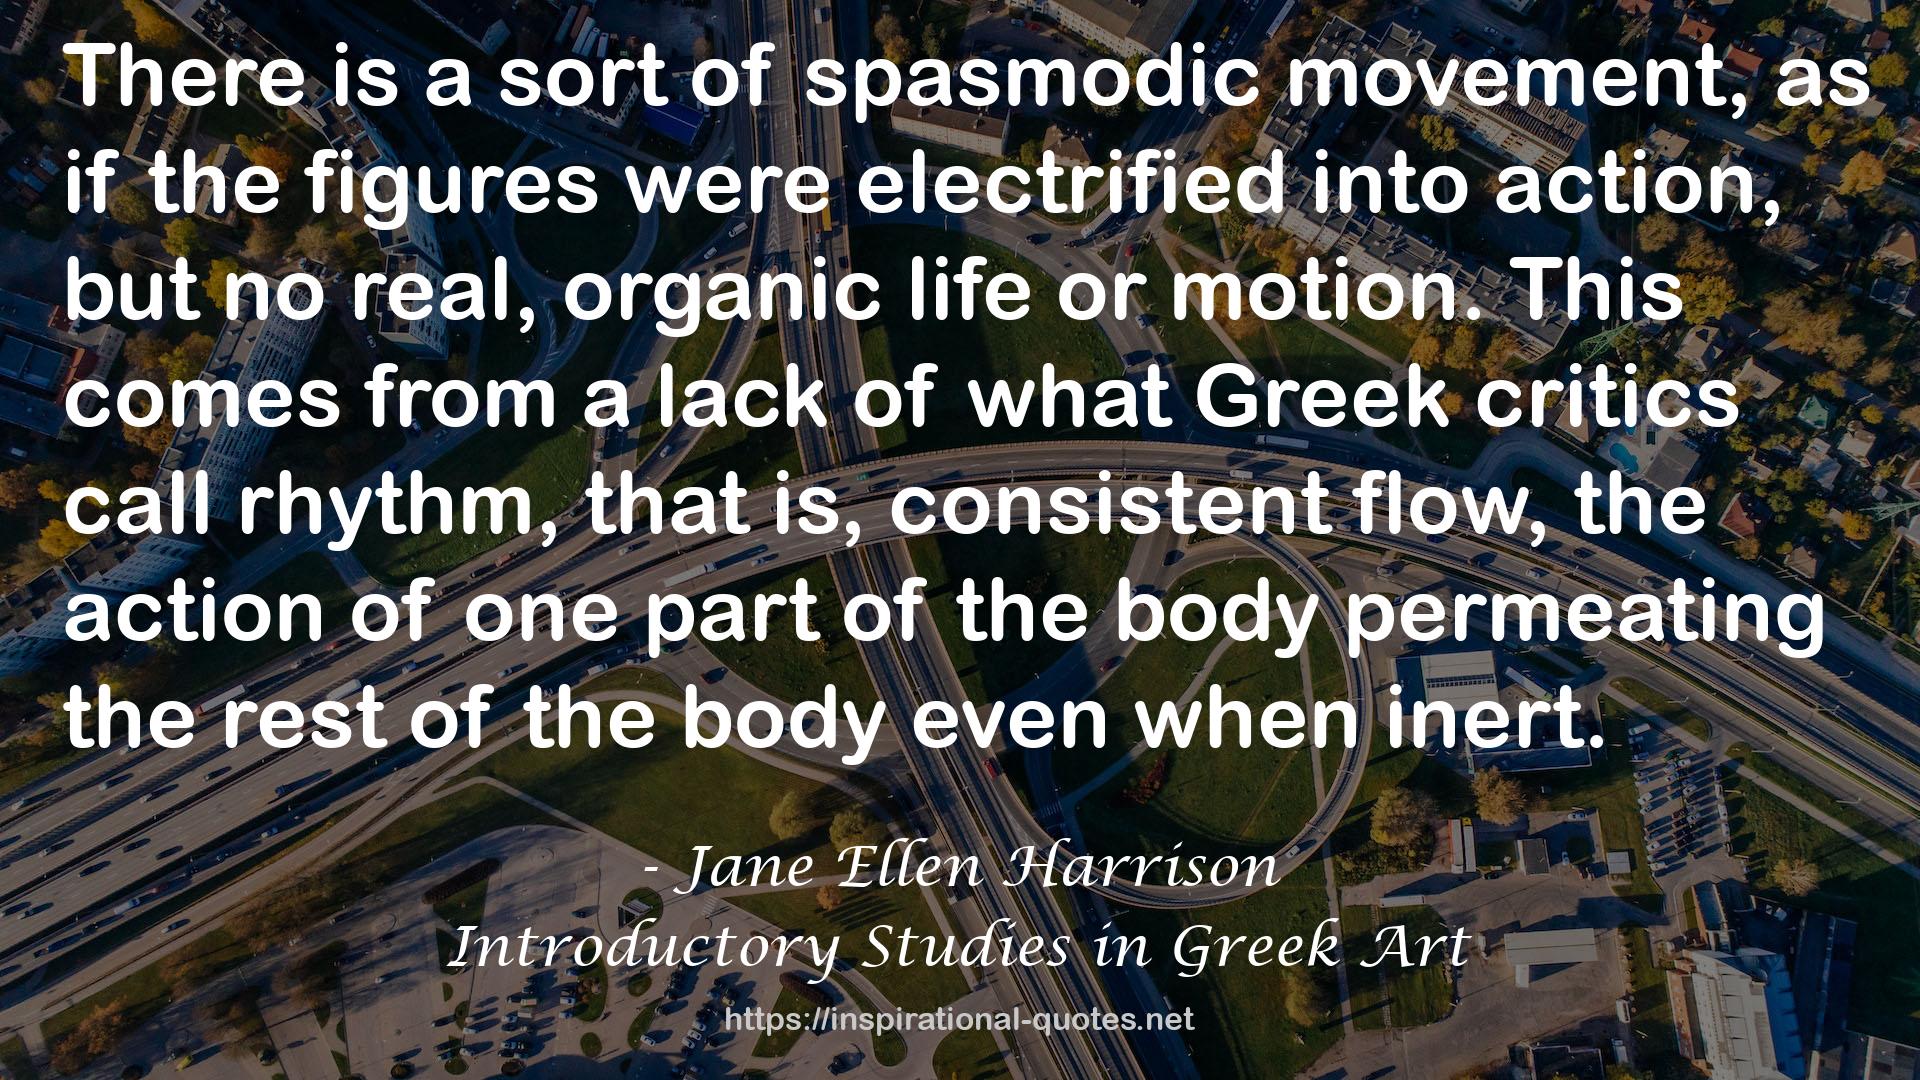 Introductory Studies in Greek Art QUOTES